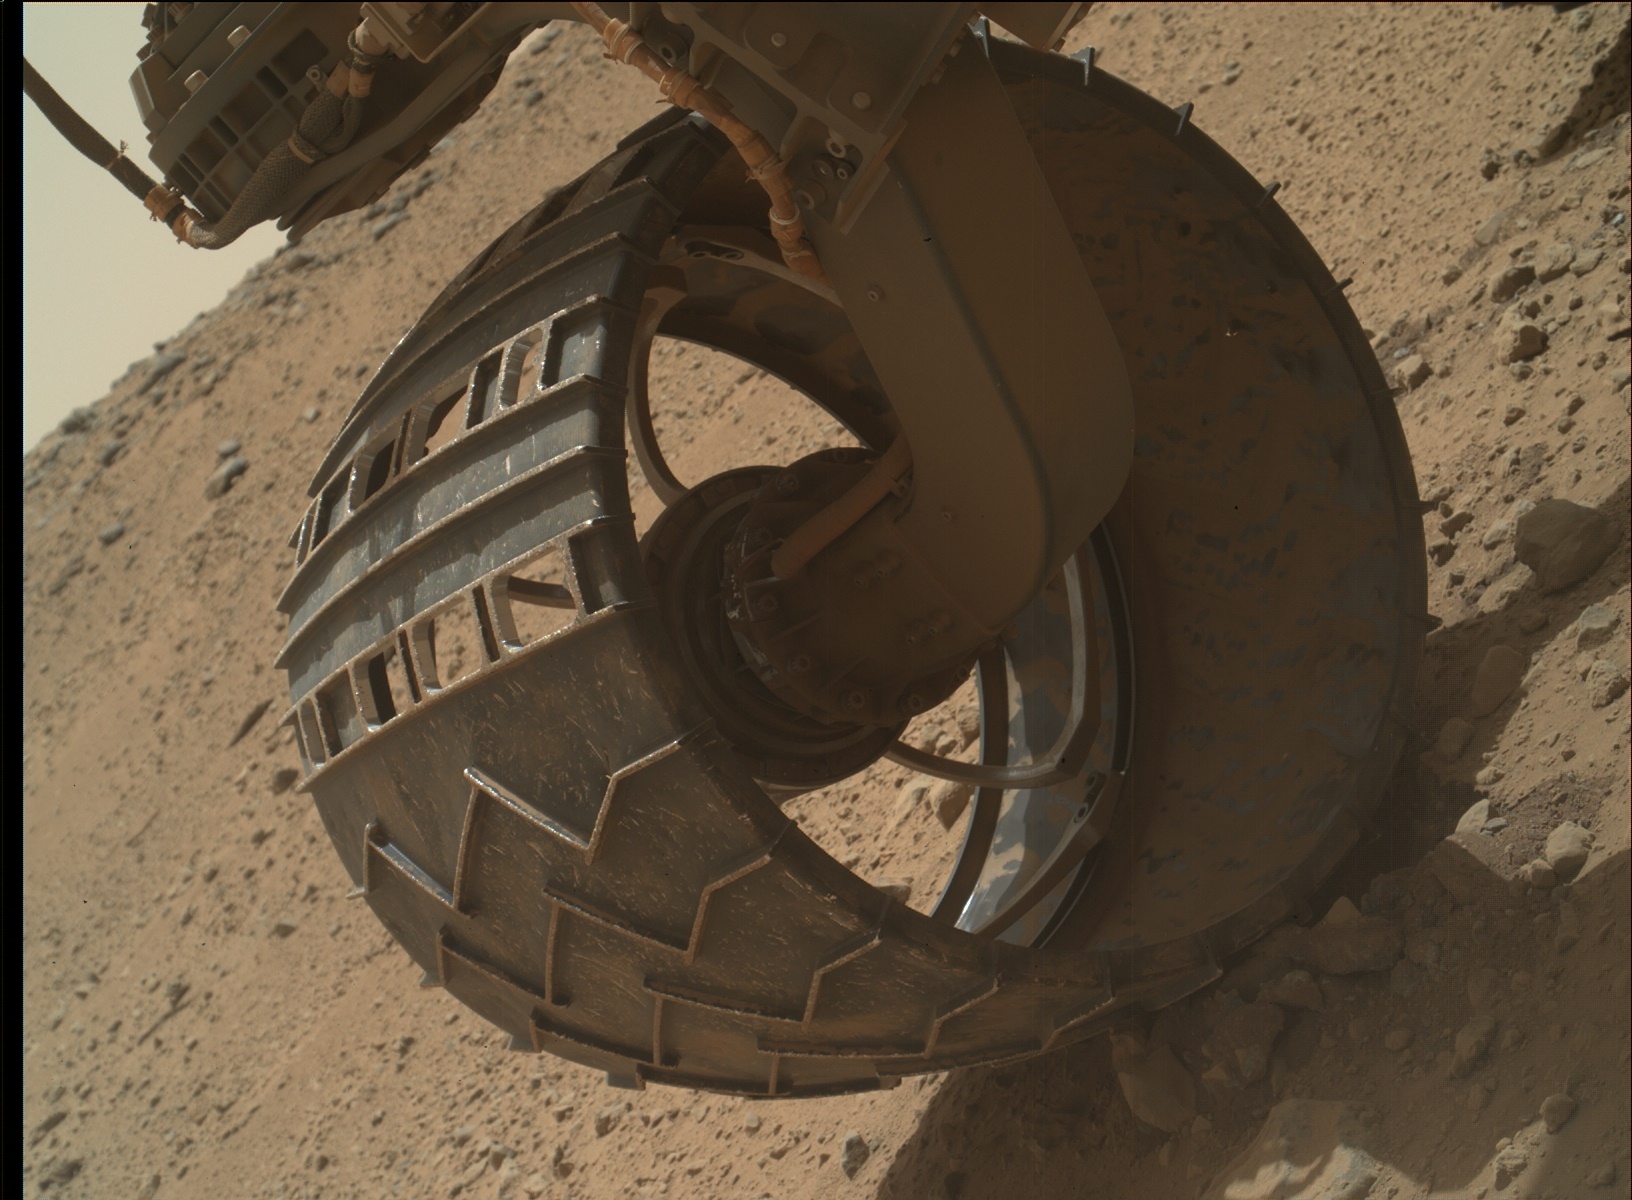 Nasa's Mars rover Curiosity acquired this image using its Mars Hand Lens Imager (MAHLI) on Sol 667